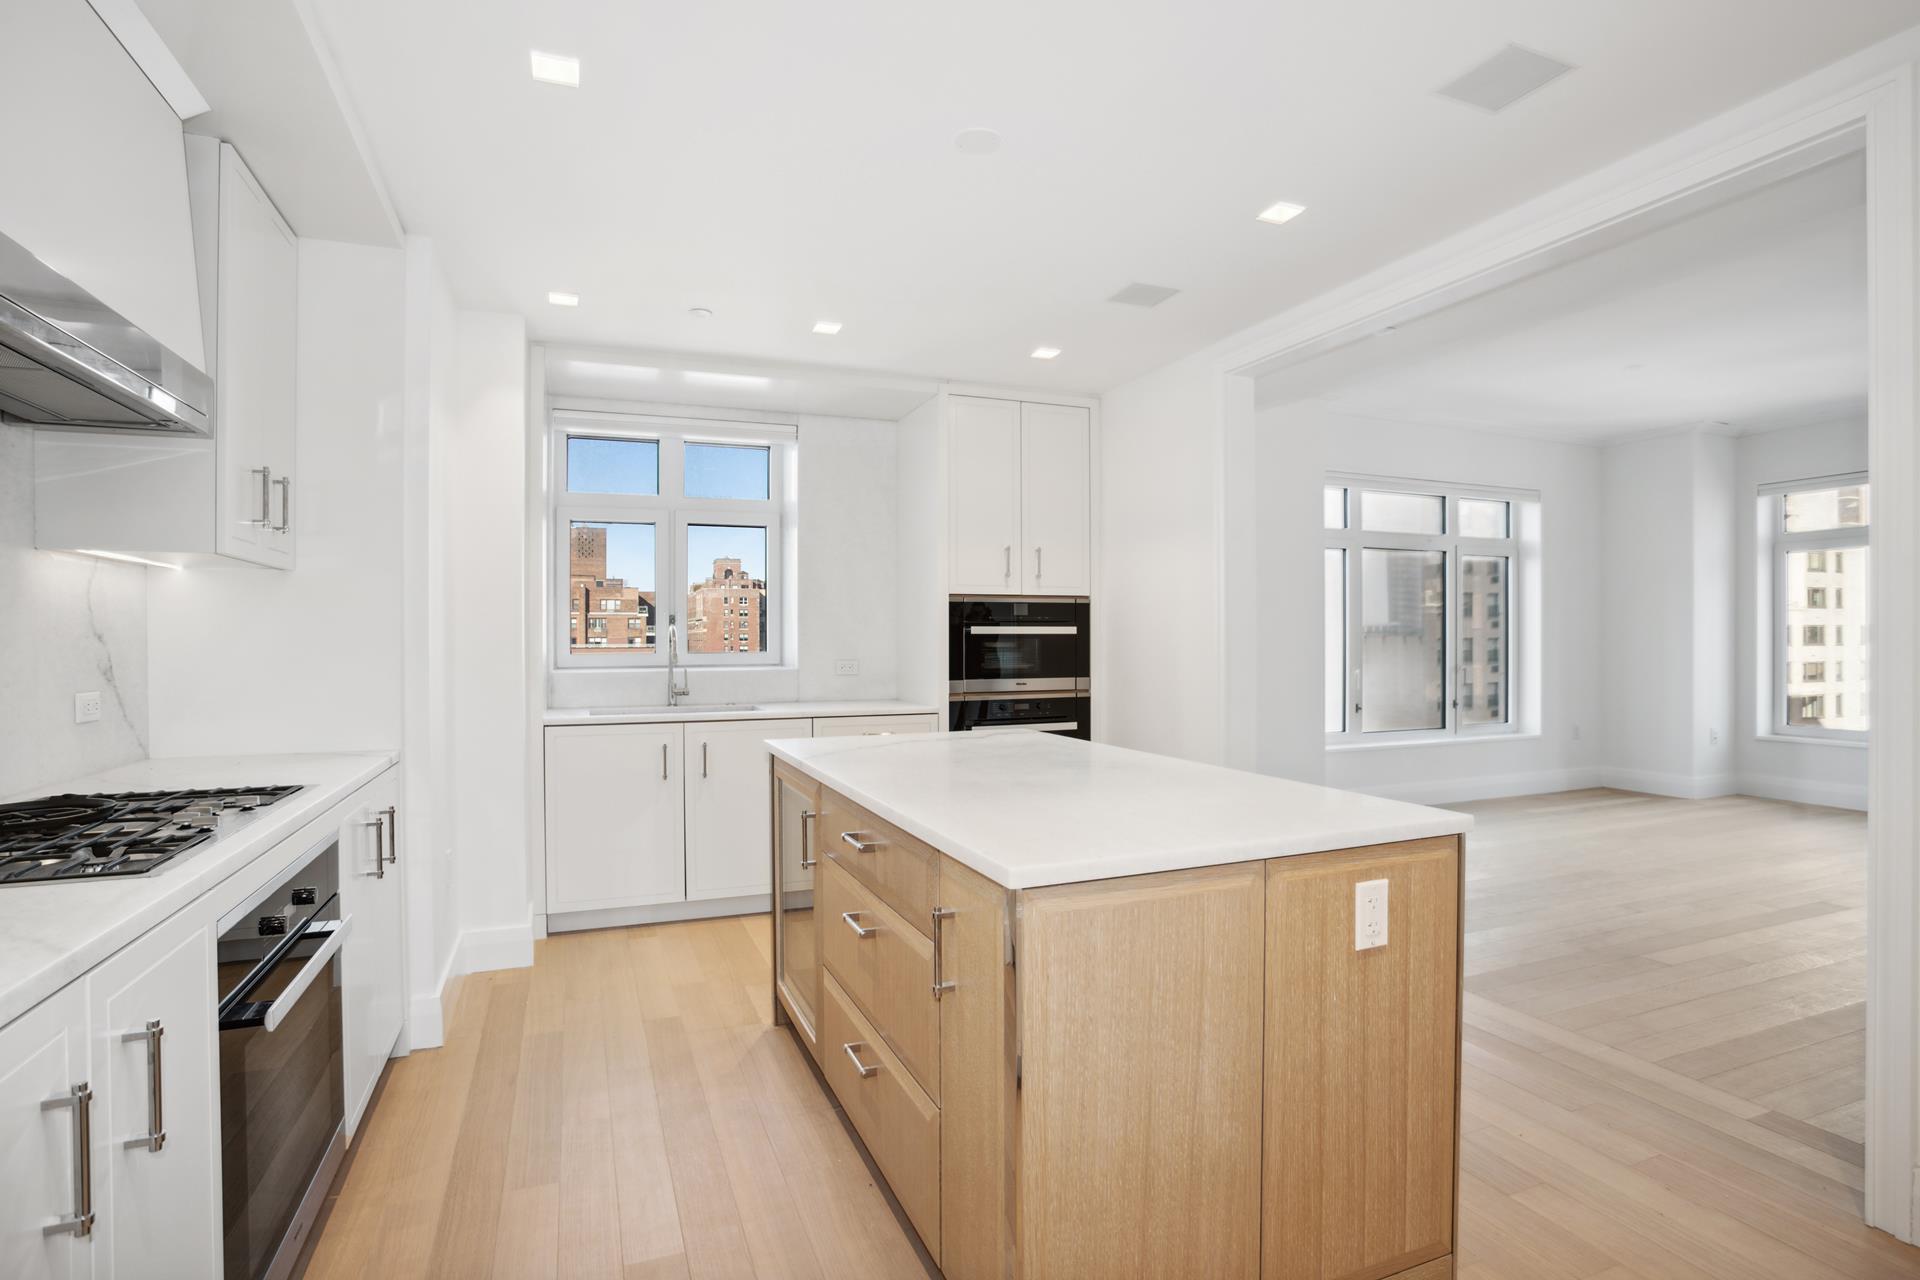 200 East 83rd Street 14B, Yorkville, Upper East Side, NYC - 3 Bedrooms  
3.5 Bathrooms  
5 Rooms - 